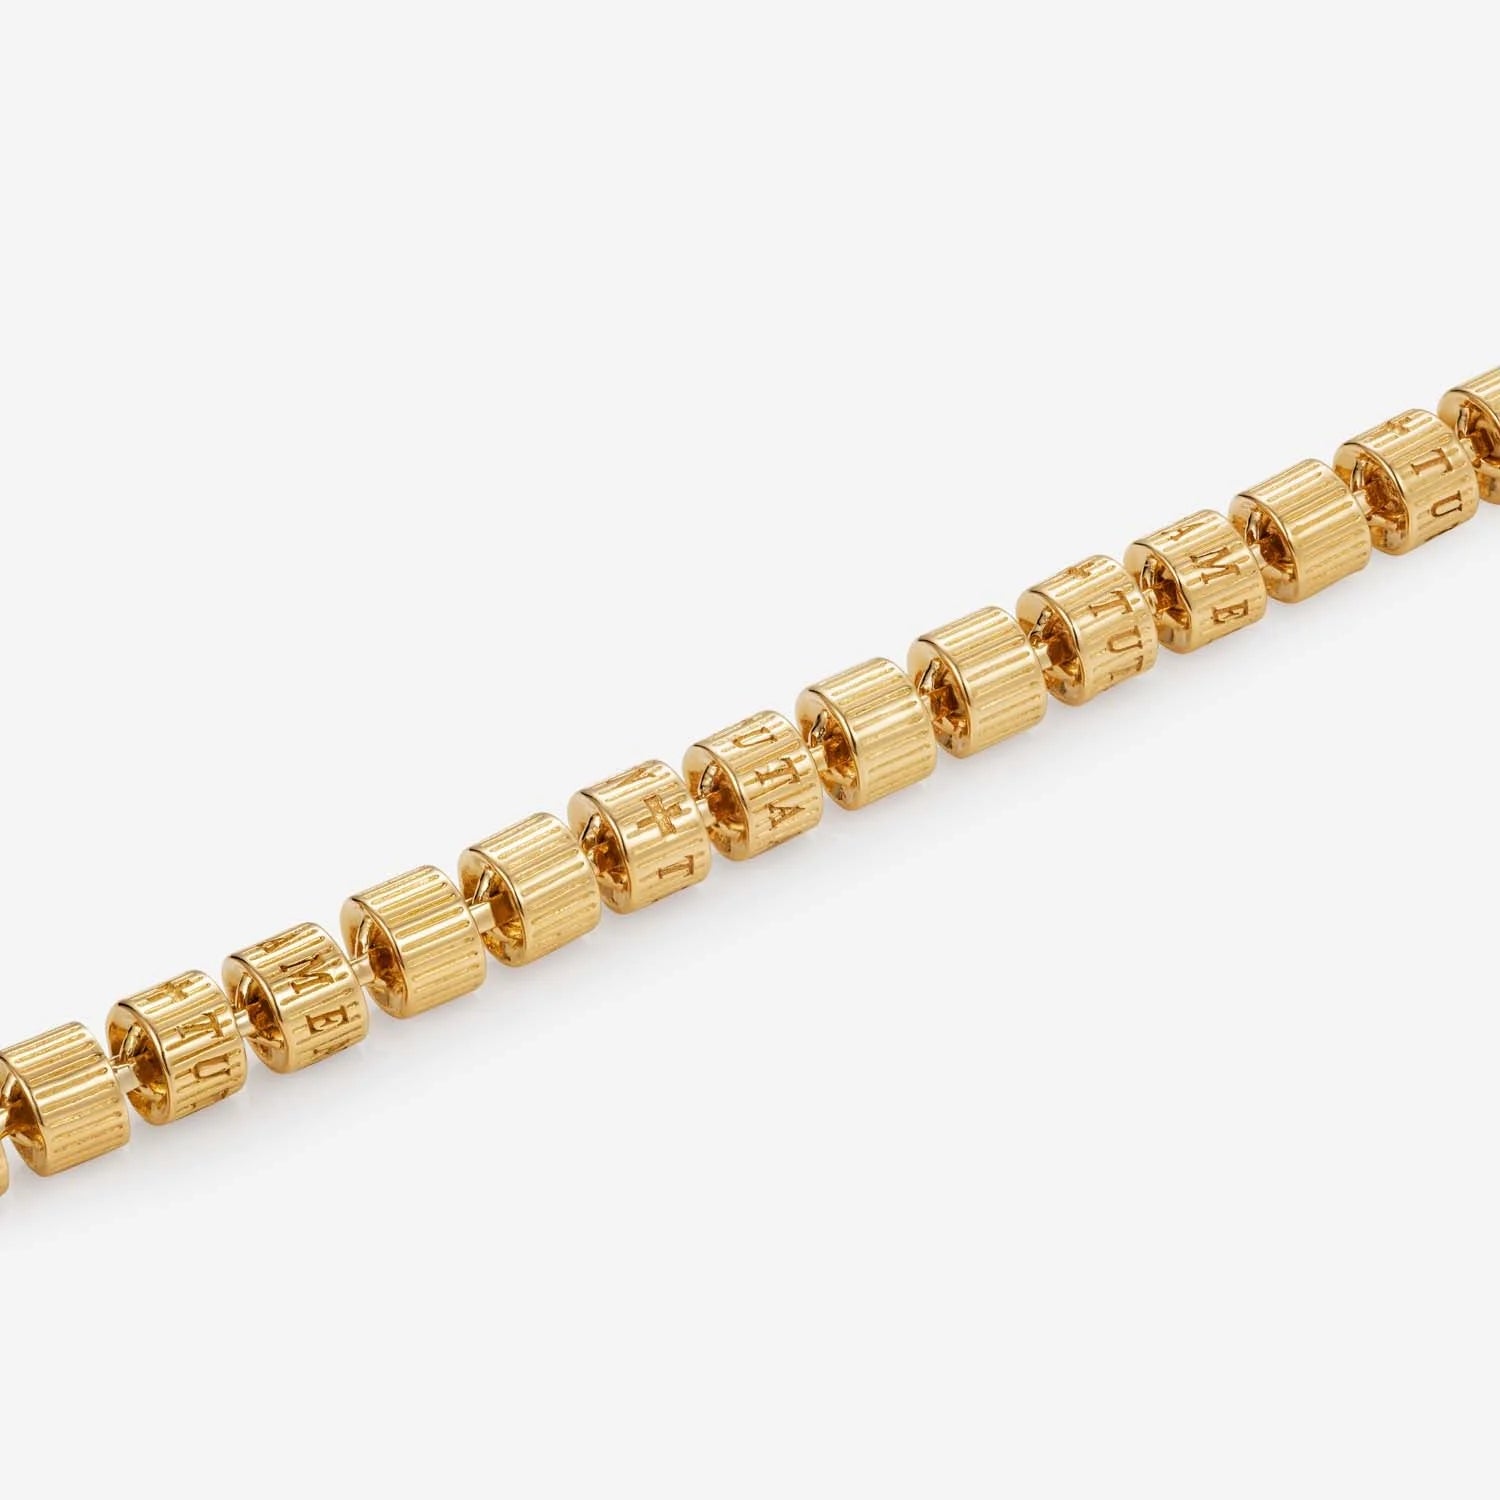 886 Tutamen Stack Necklace in 18ct Yellow Gold